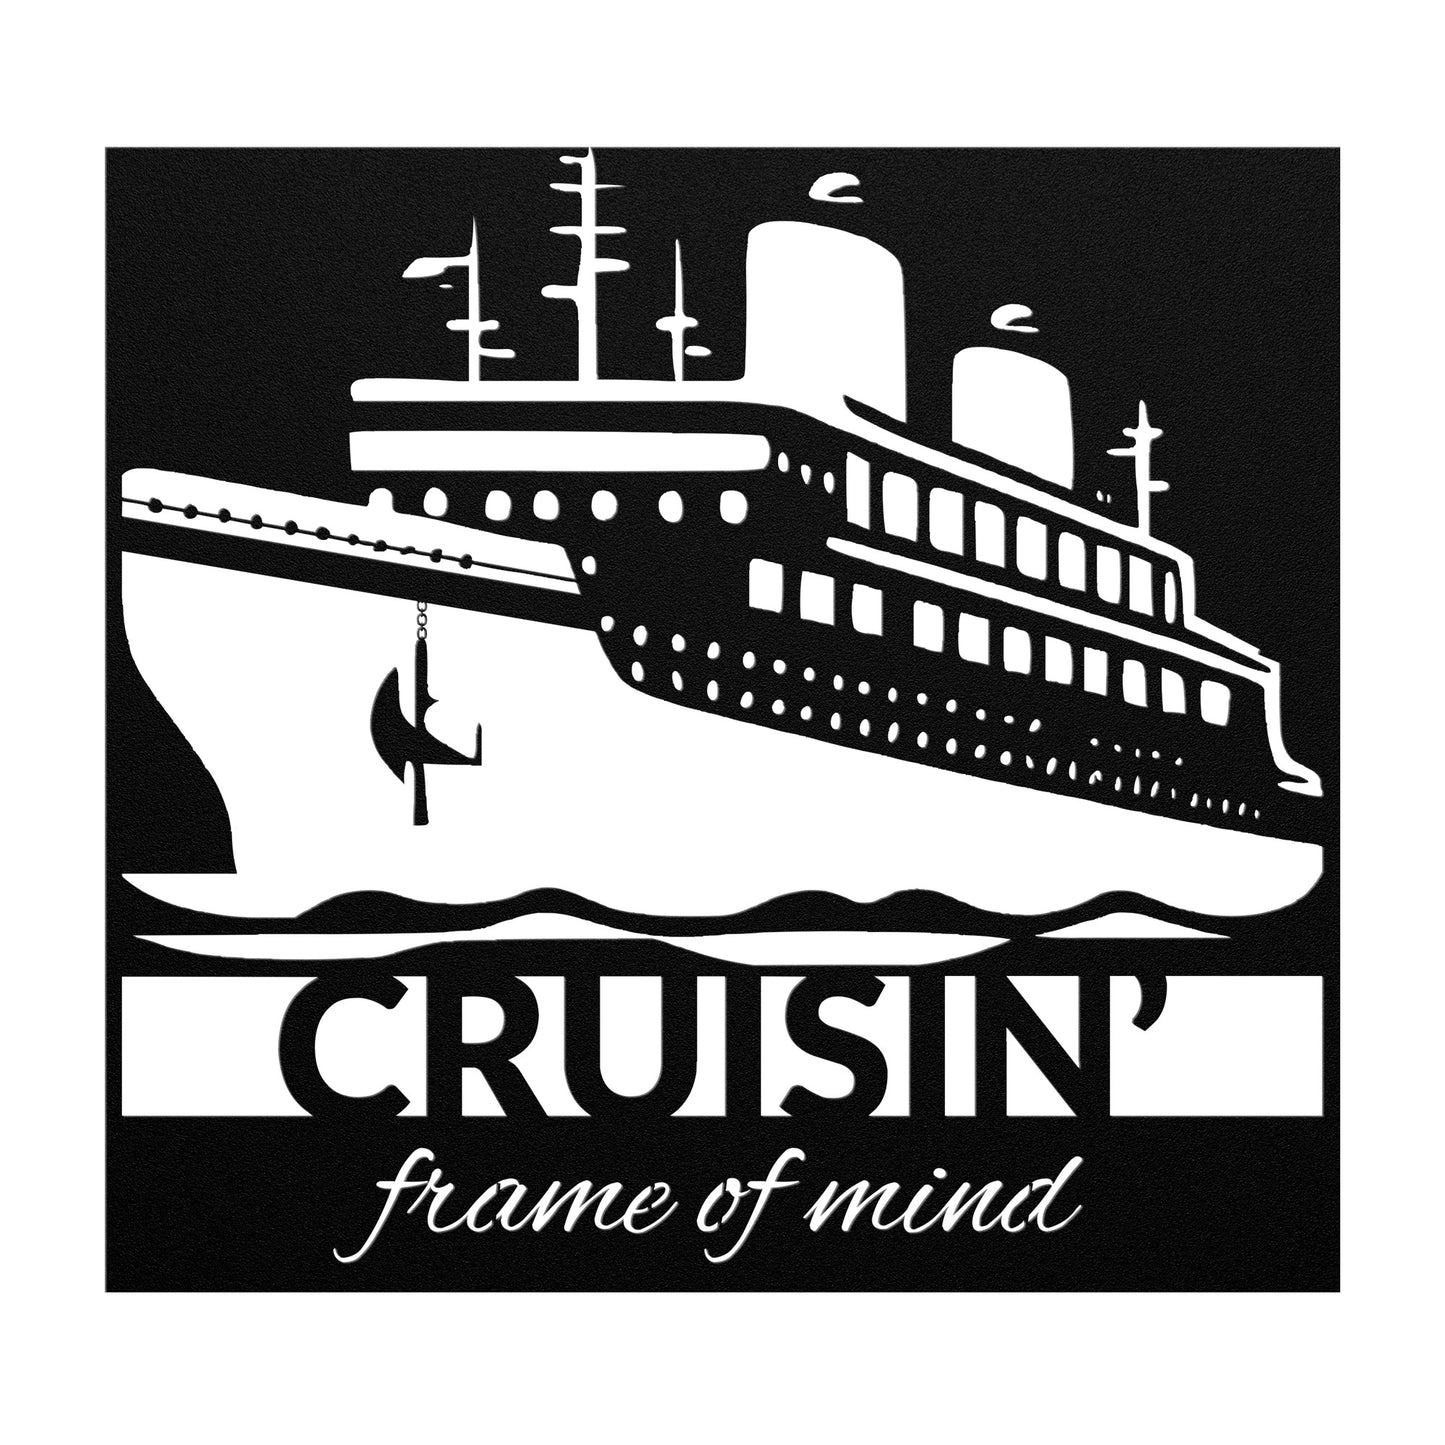 Cruise Ship Metal Wall Art Decor - Display Your Love of Cruises With This Fun Metal Sign